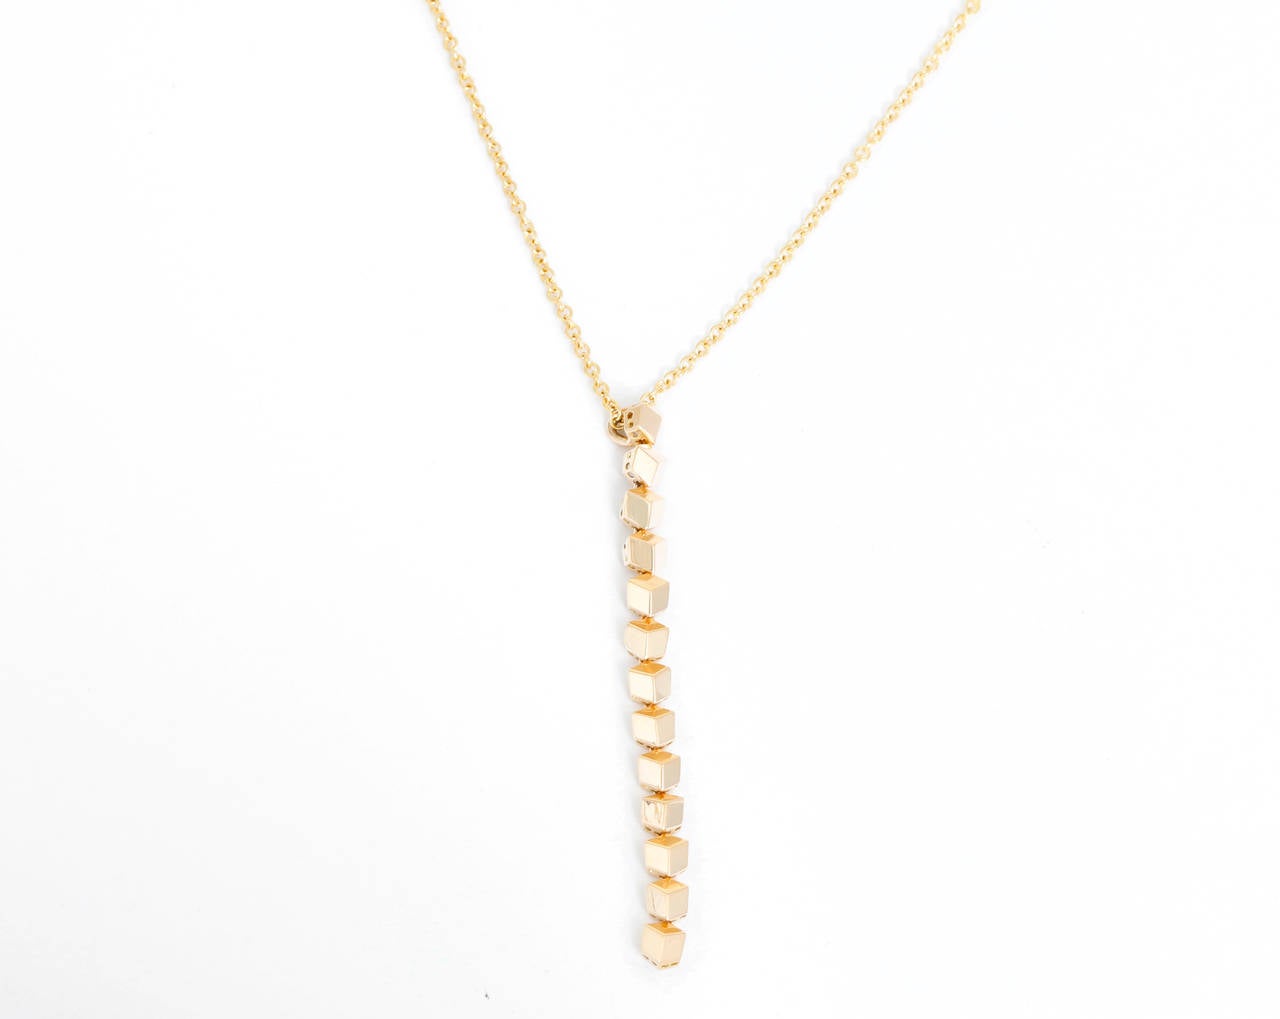 From the Brillante Collection, this necklace features an 18k yellow gold  chain and geometric style pendant. Pendant measures apx. 2-inches in length and chain measures apx. 16-inches in length. This necklace is perfect for everyday wear and special